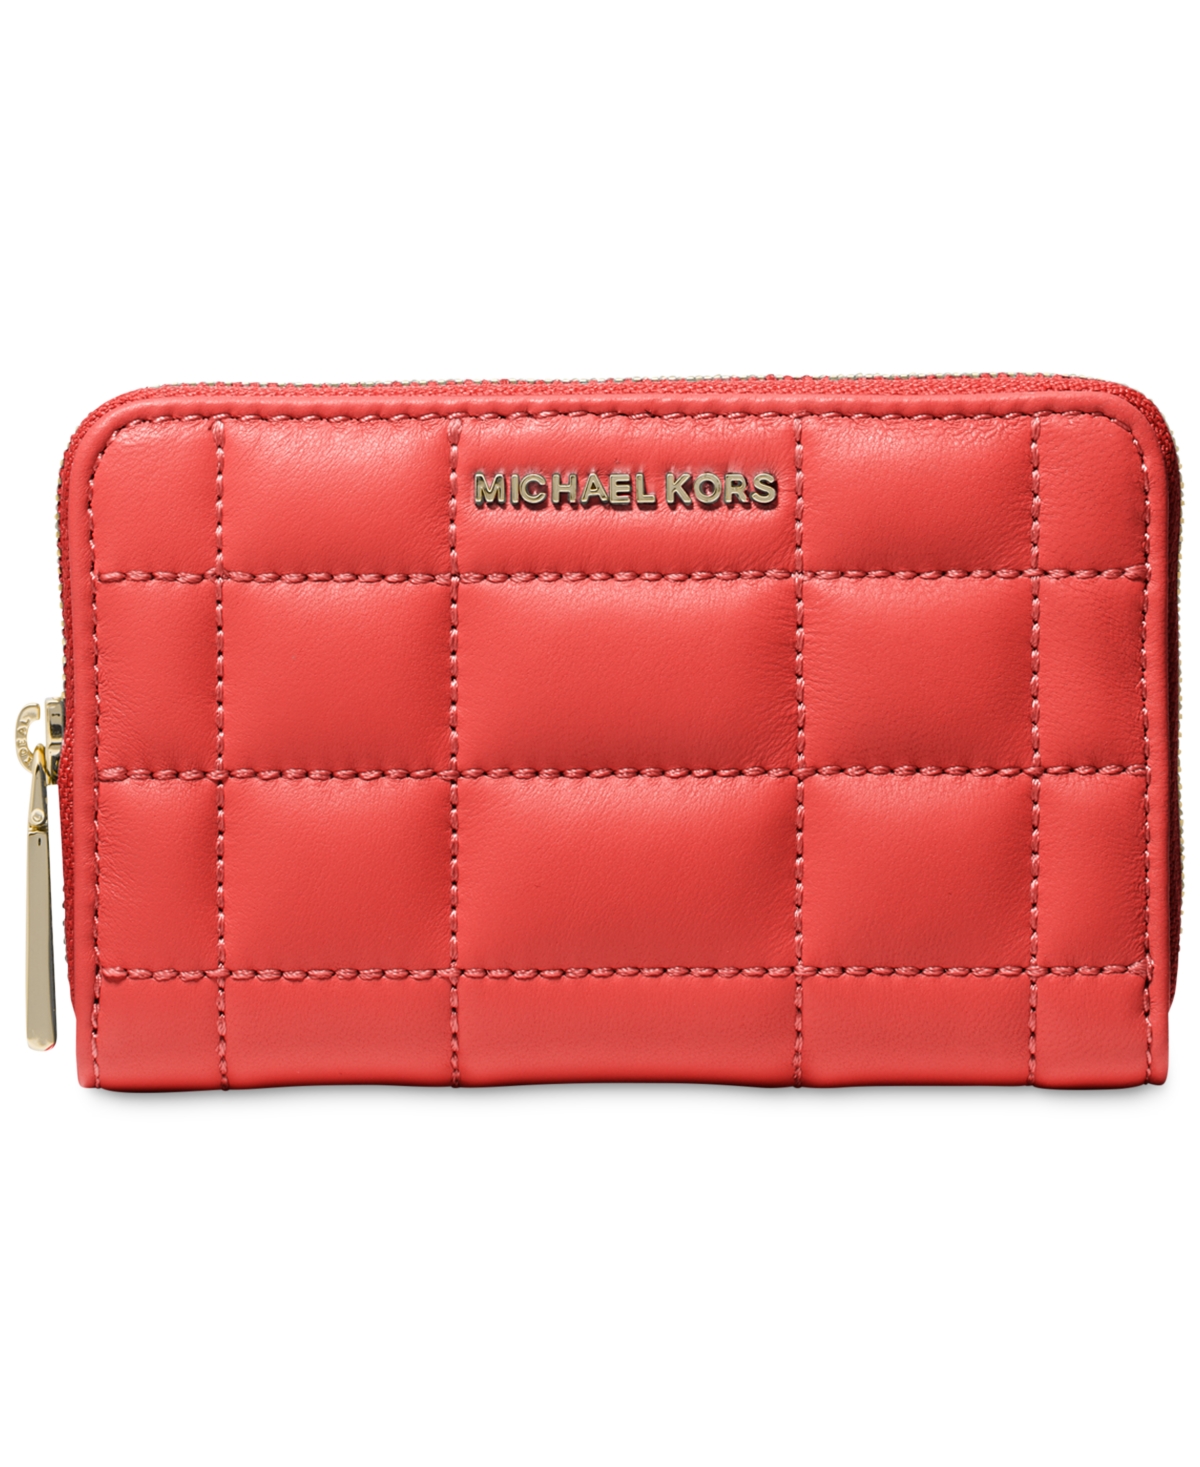 Michael Michael Kors Jet Set Small Leather Zip Around Card Case - Spiced Coral